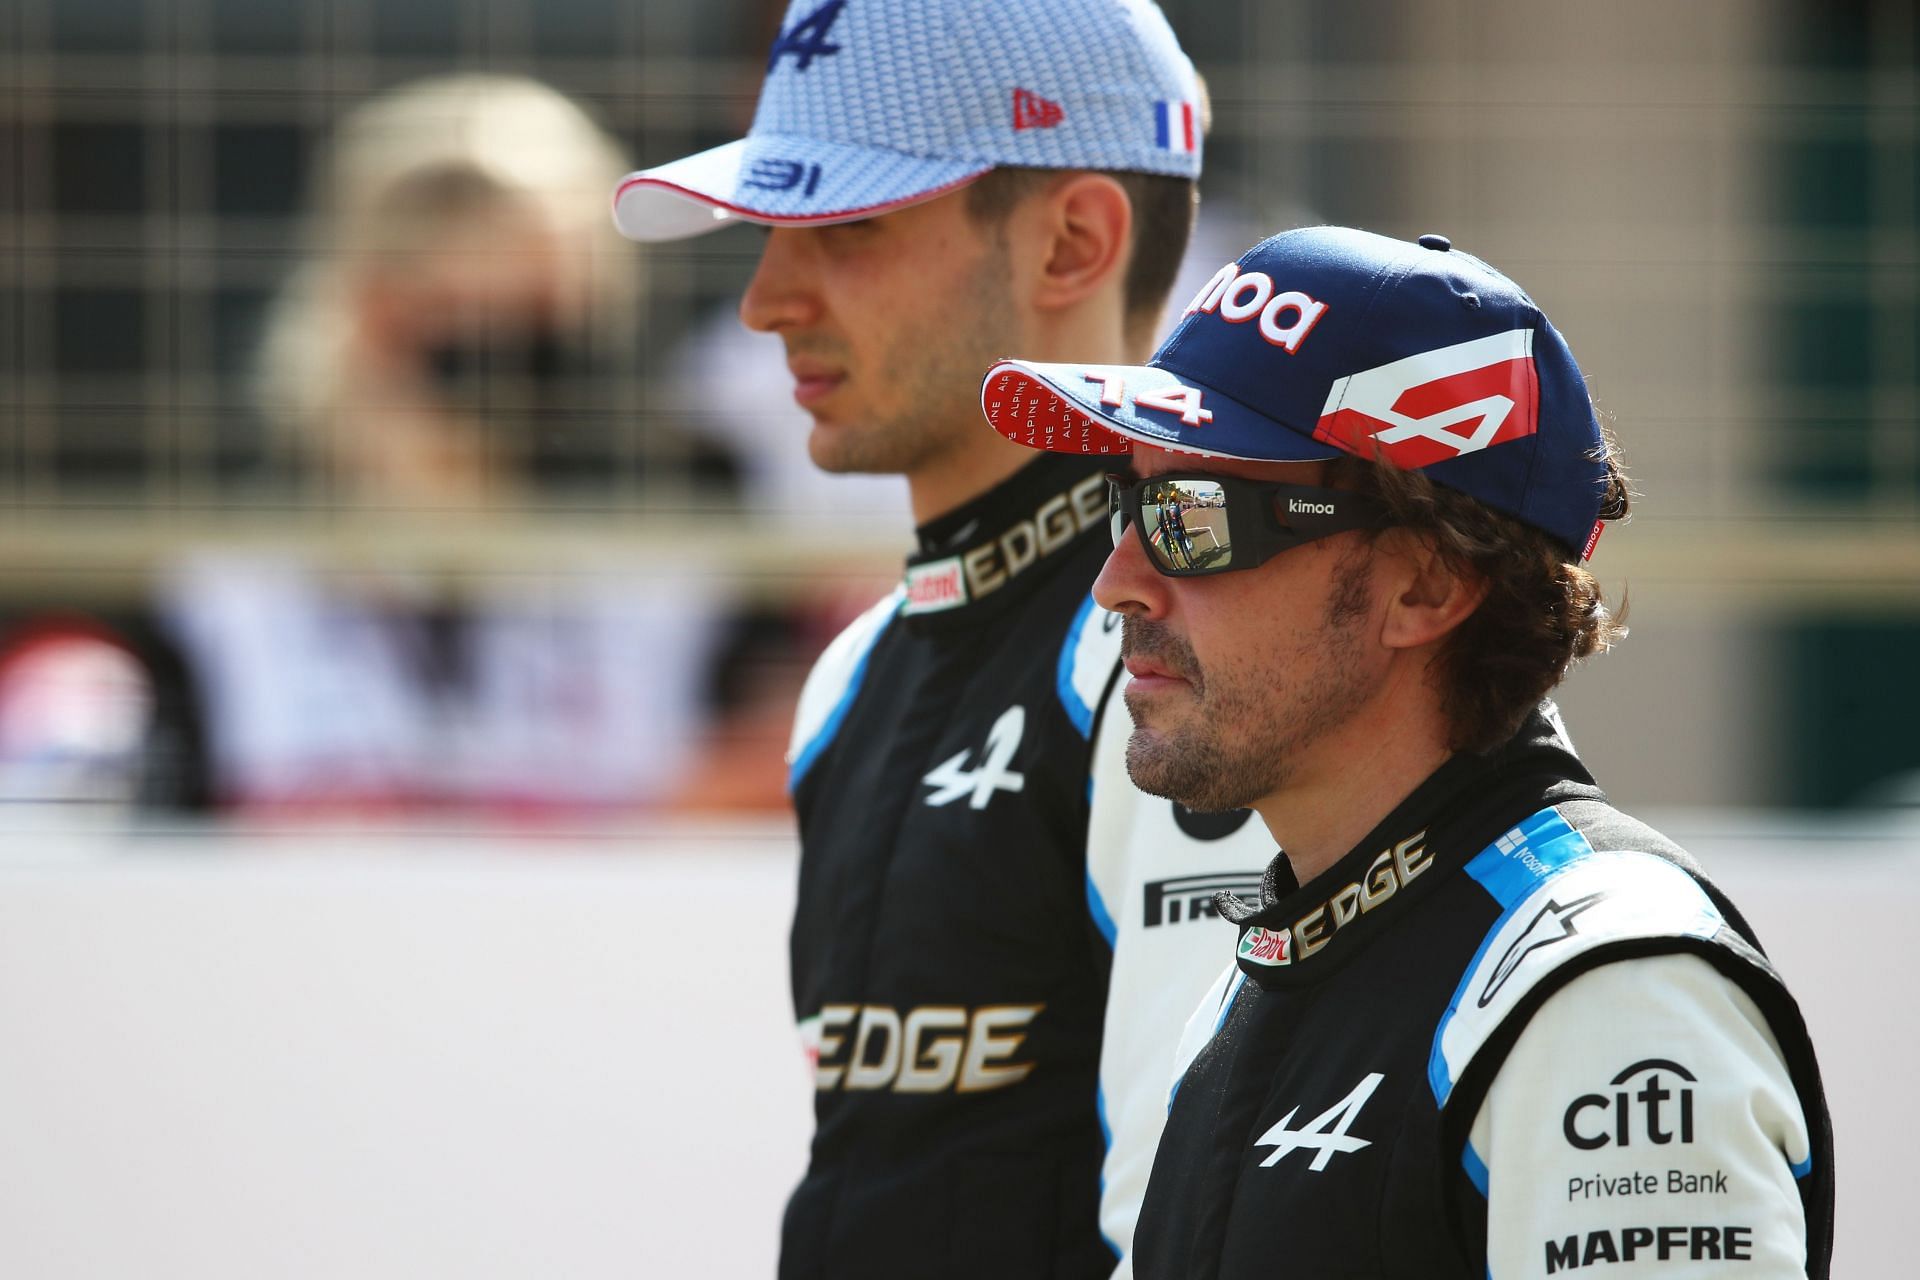 Esteban Ocon and Fernando Alonso stand on the grid. (Photo by Joe Portlock/Getty Images)